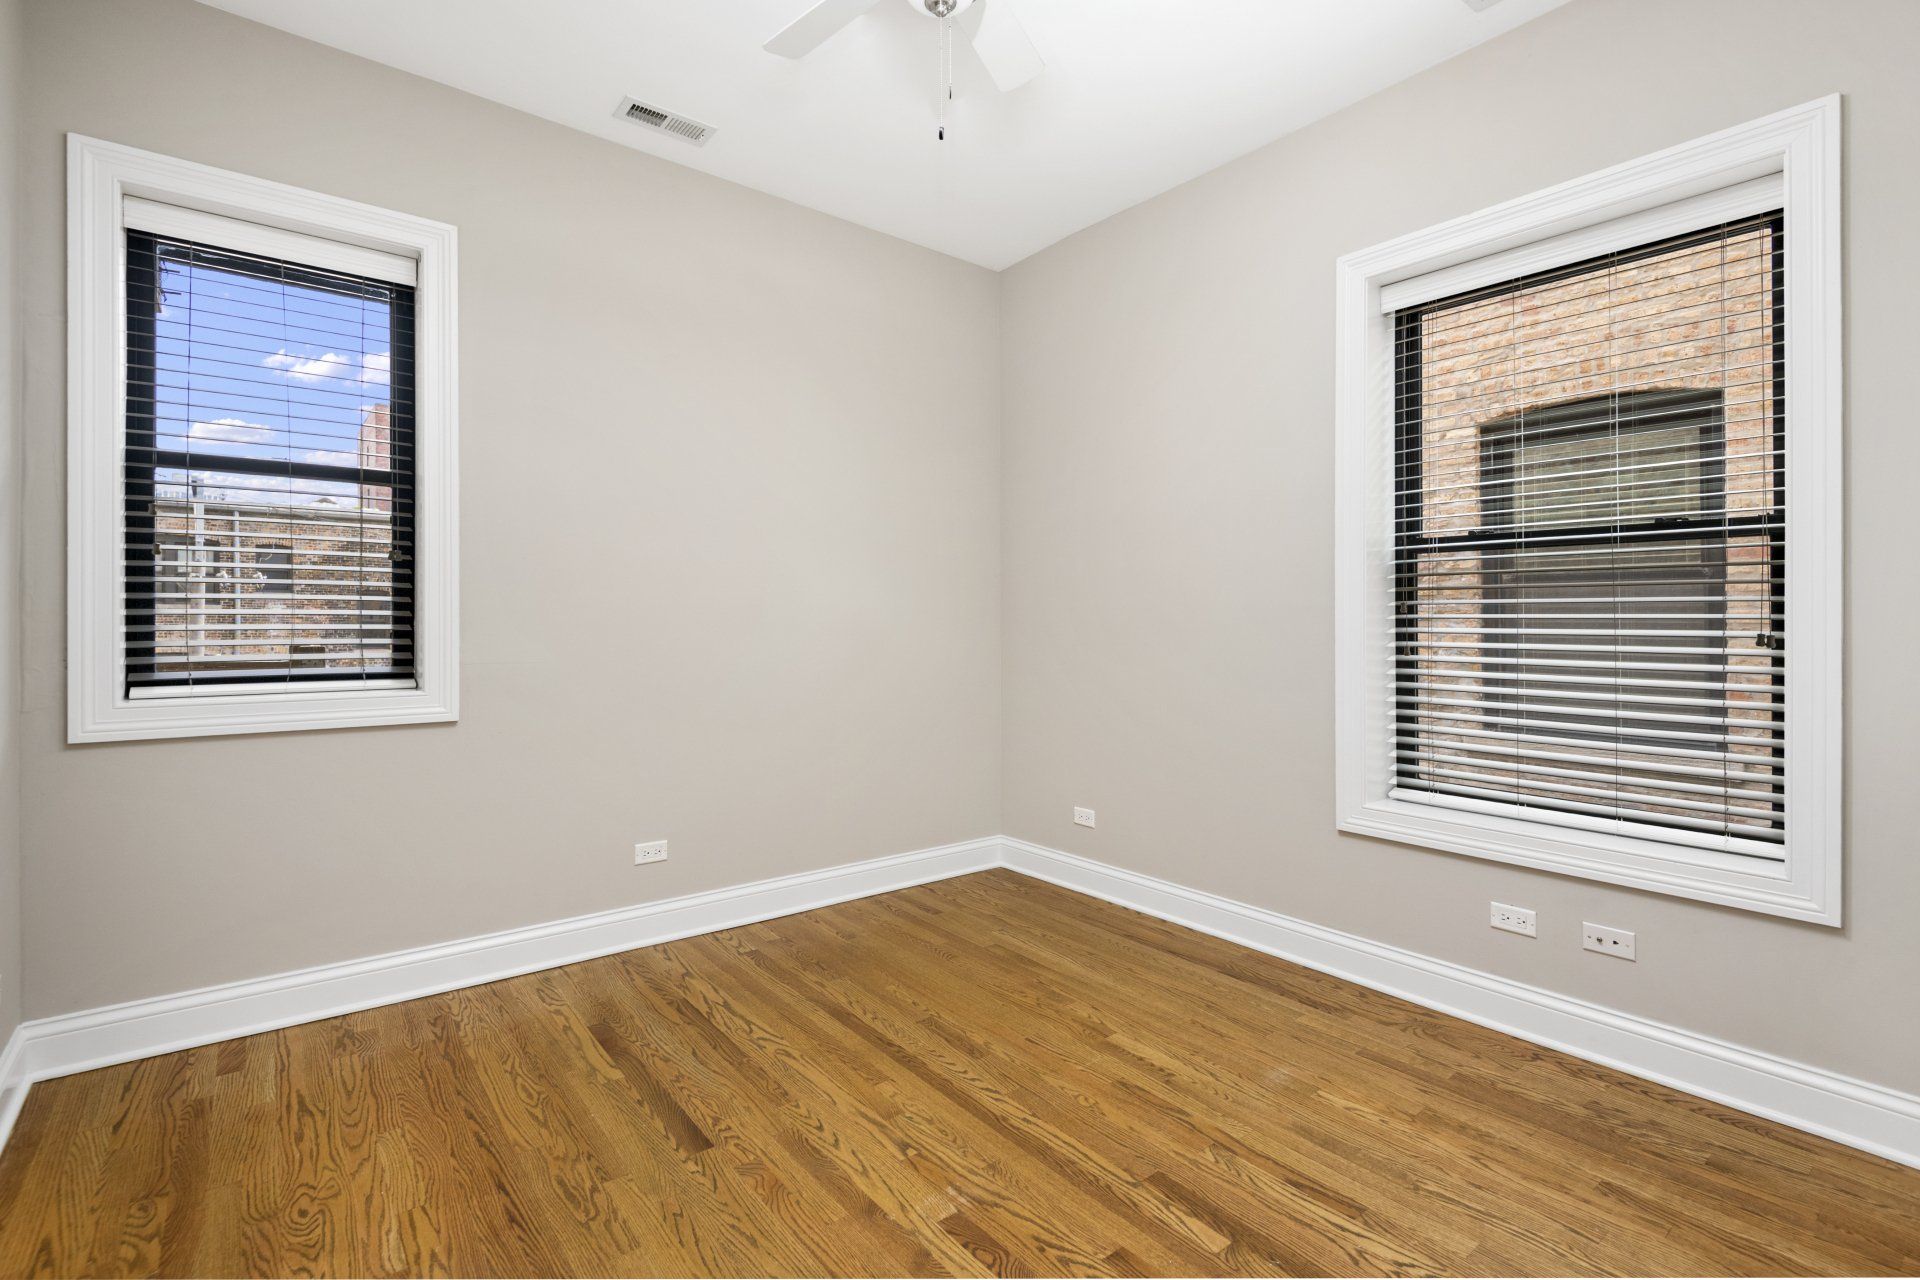 An empty apartment bedroom with hardwood floors and two windows.